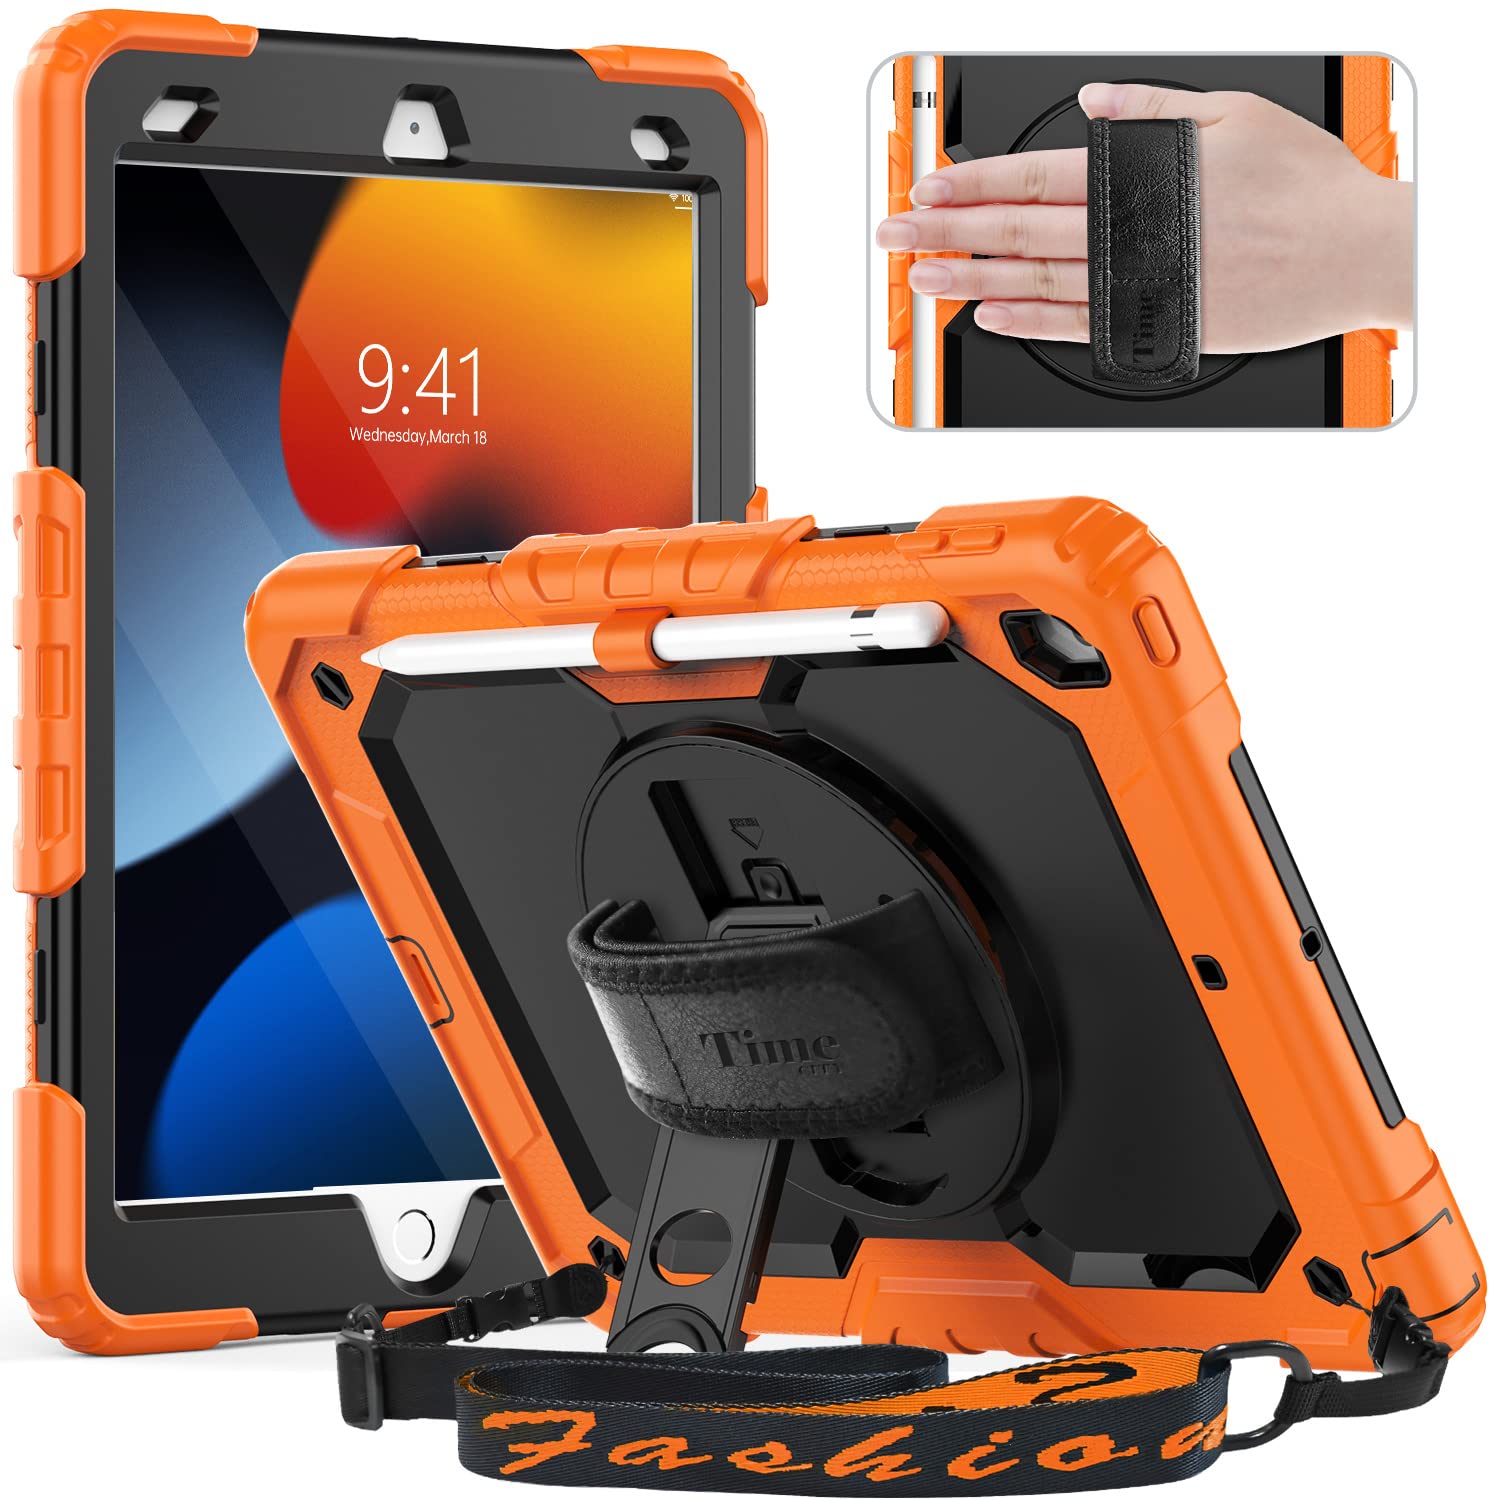 Shoulder Strap for Rugged and Field-Ready Tablet Cases | Targus